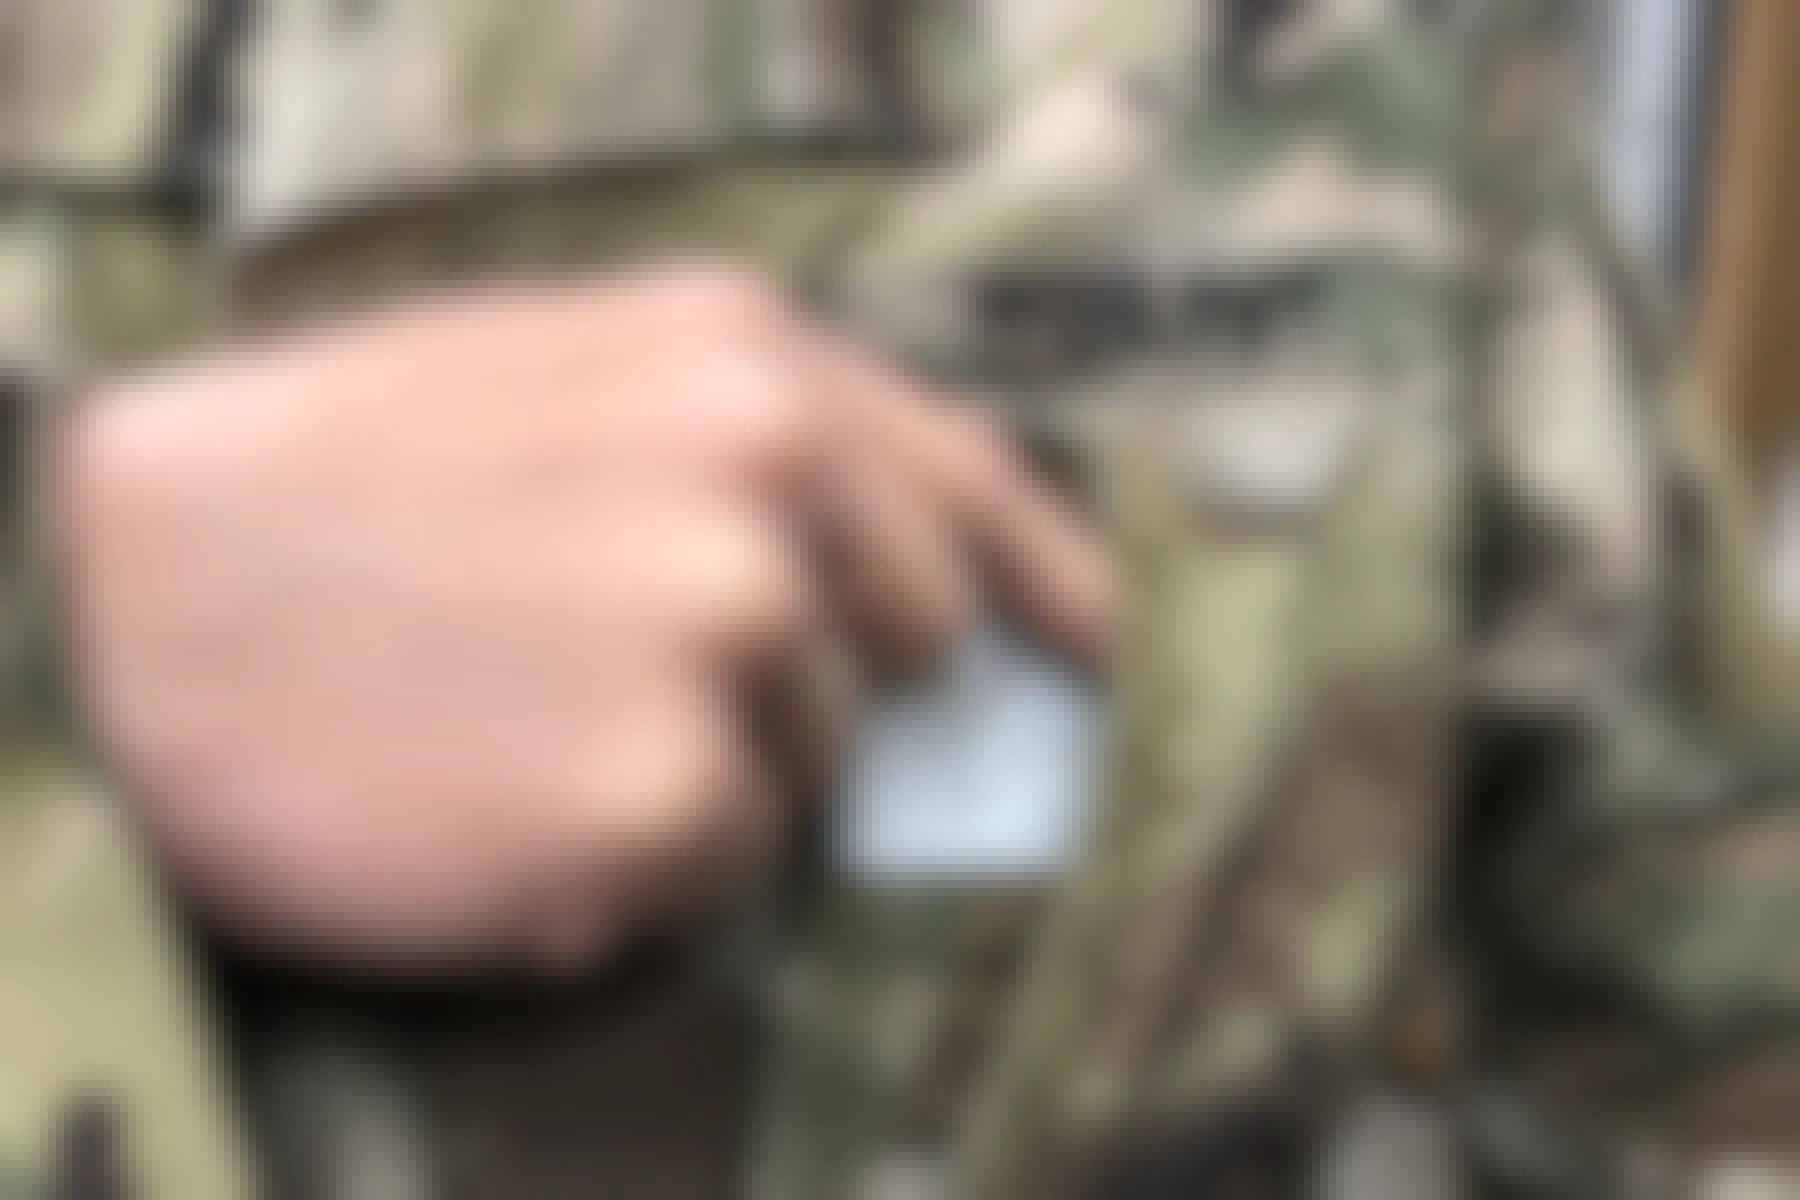 person in US Army fatigues pulls a military ID from his or her front shirt pocket